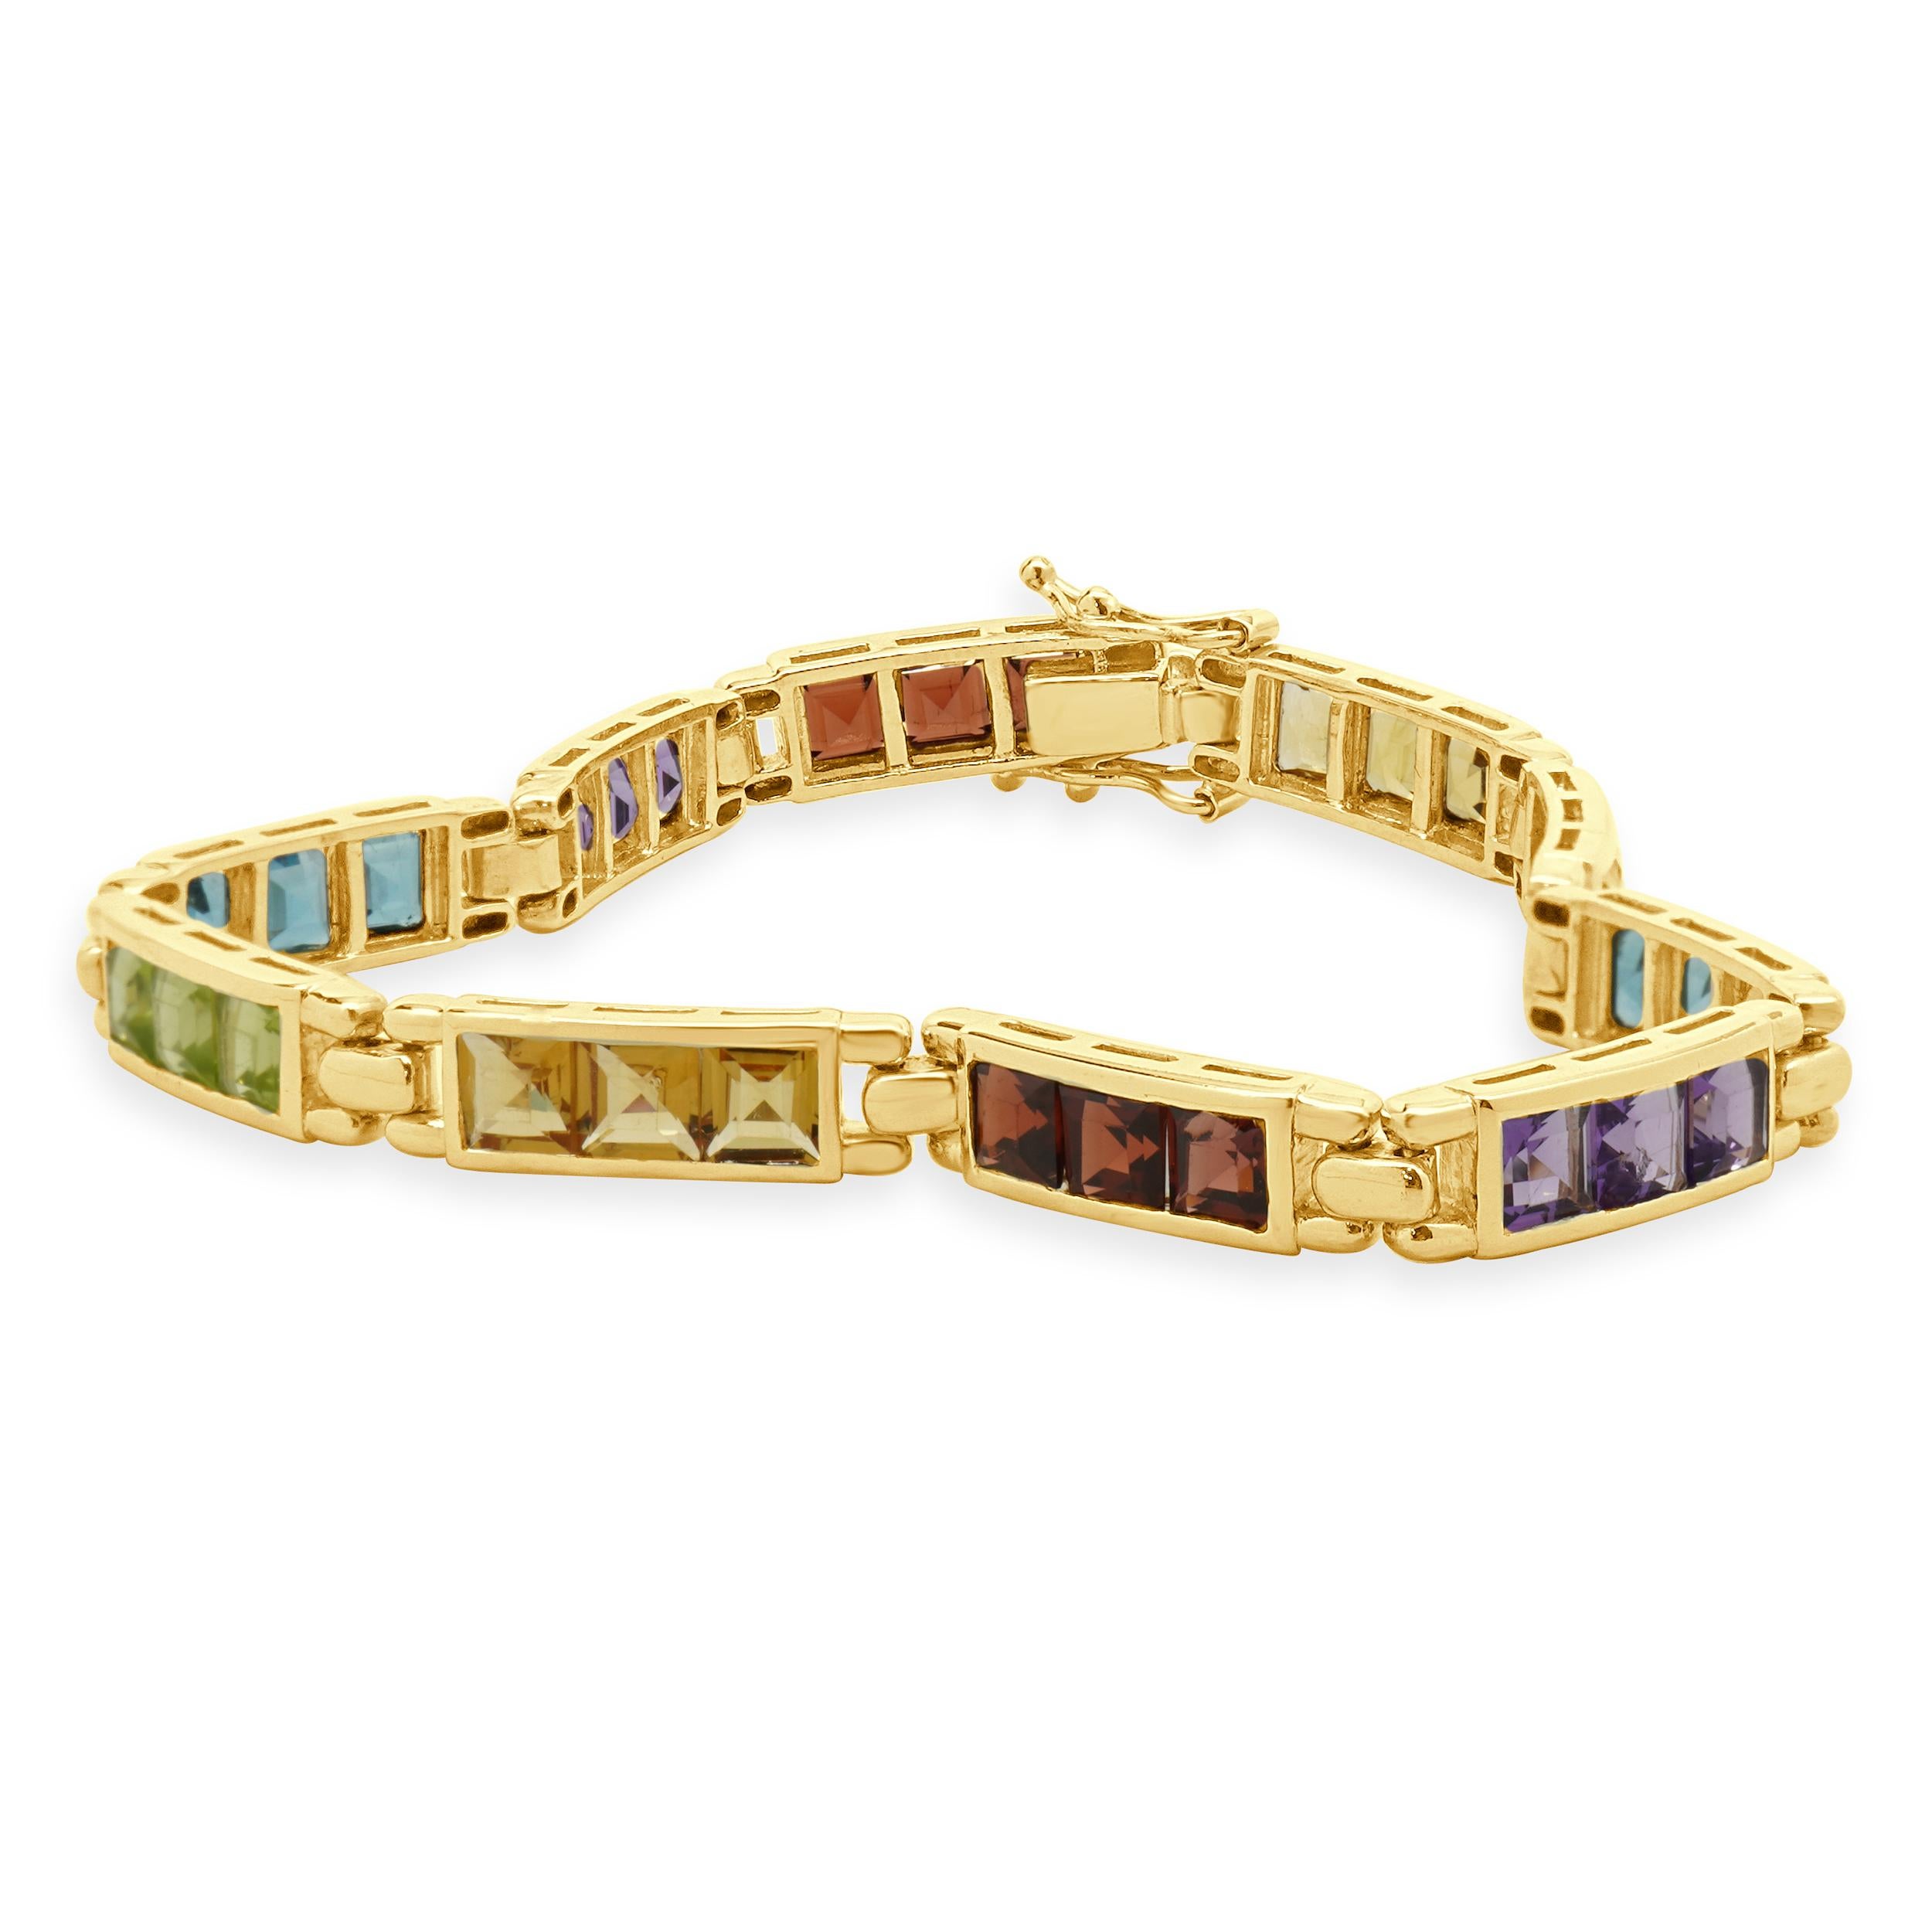 Designer: custom
Material: 14K yellow gold
Gemstones: 30 square cut = 9.00cttw
Weight: 13.77 grams
Dimensions: bracelet will fit up to a 7-inch wrist
